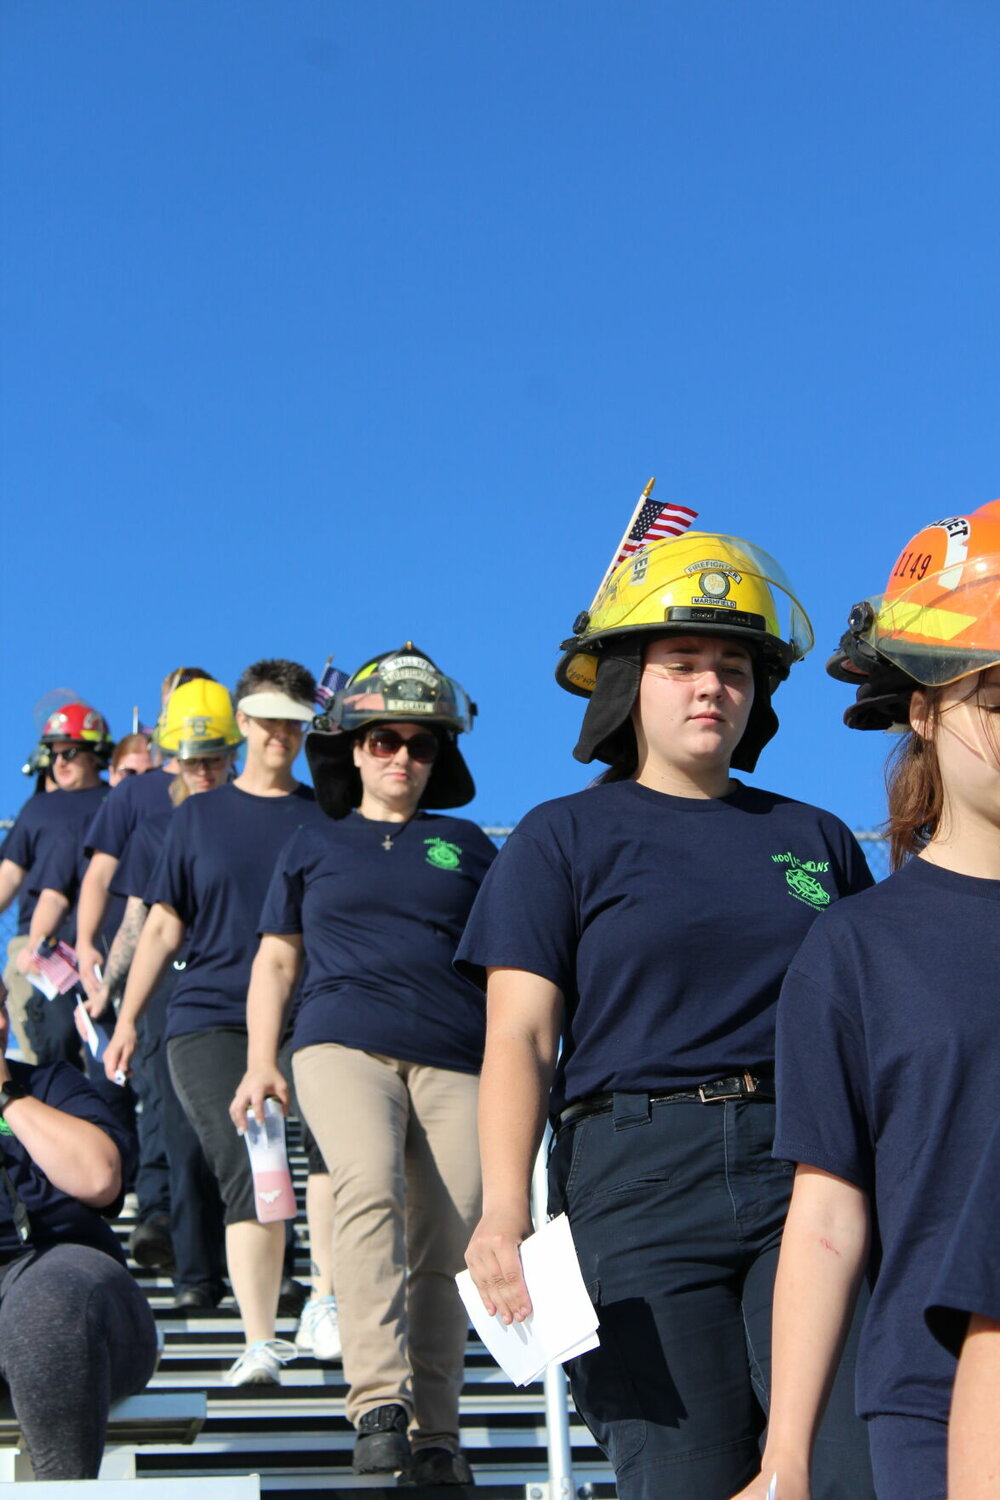 MFPD crews reflect in silence as they complete the stair climb in memory of firefighters who were unable to complete their mission 22 years ago.